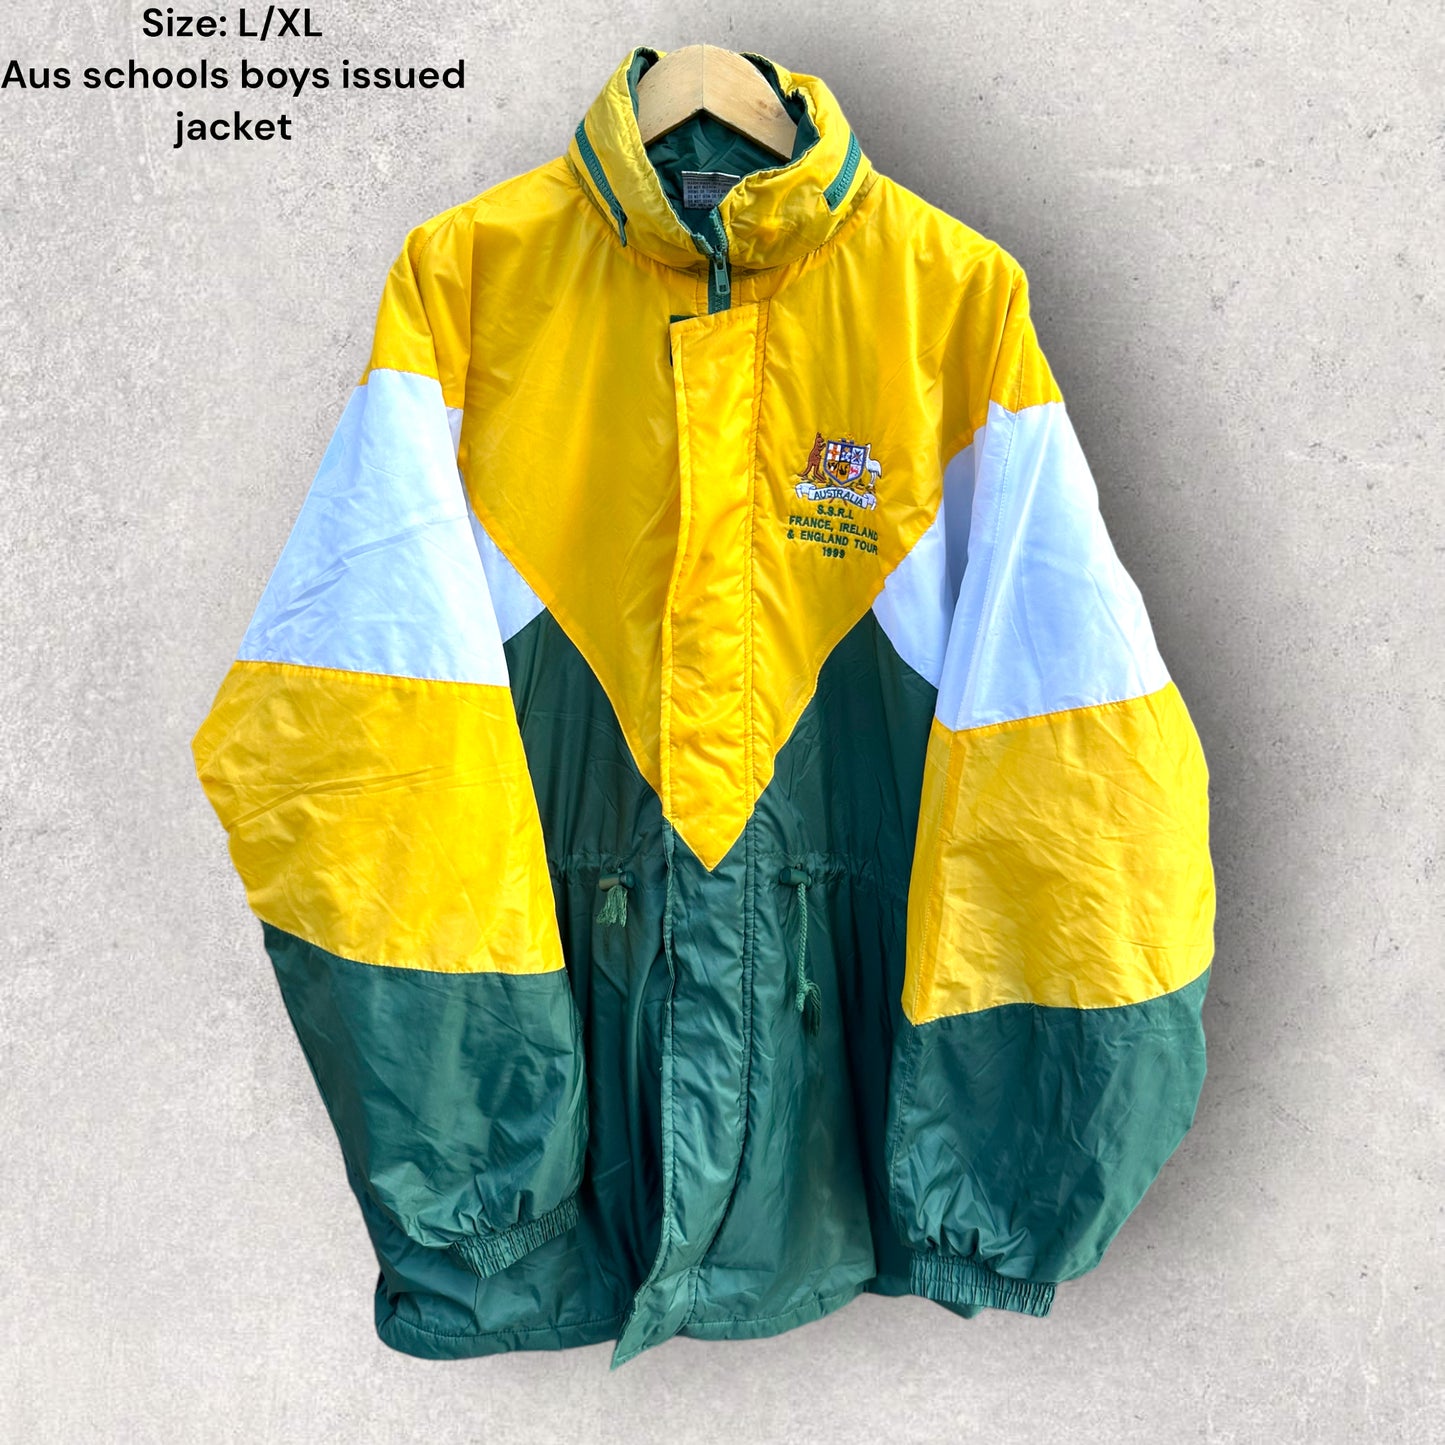 AUSTRALIAN SCHOOLBOYS RUGBY LEAGUE 1999 ISSUED JACKET